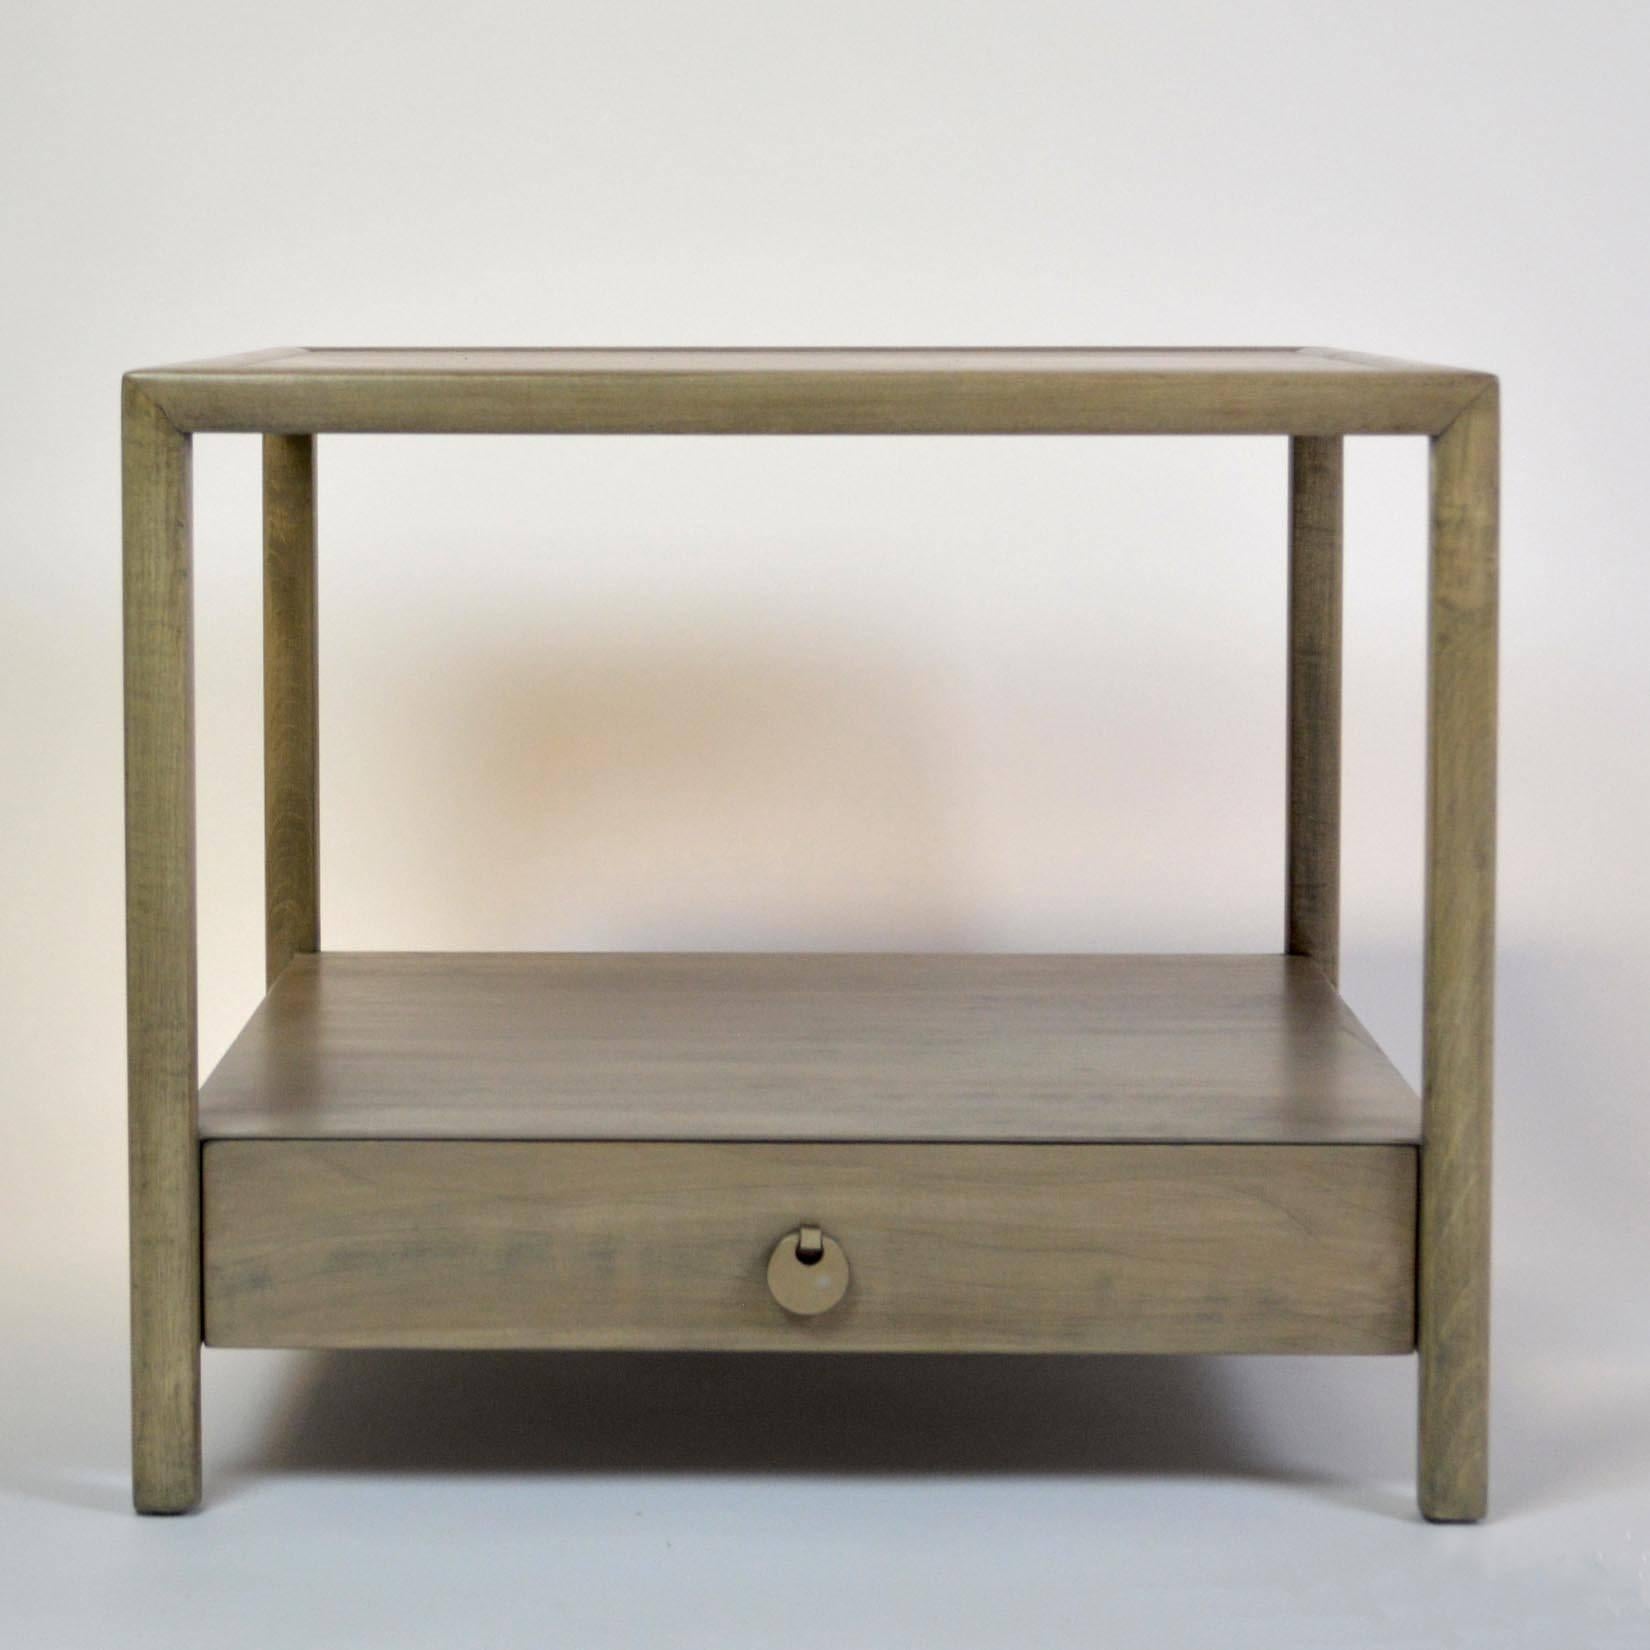 An end table or nightstand by Michael Taylor for Baker Furniture's New World collection. refinished in a pale grey stain.